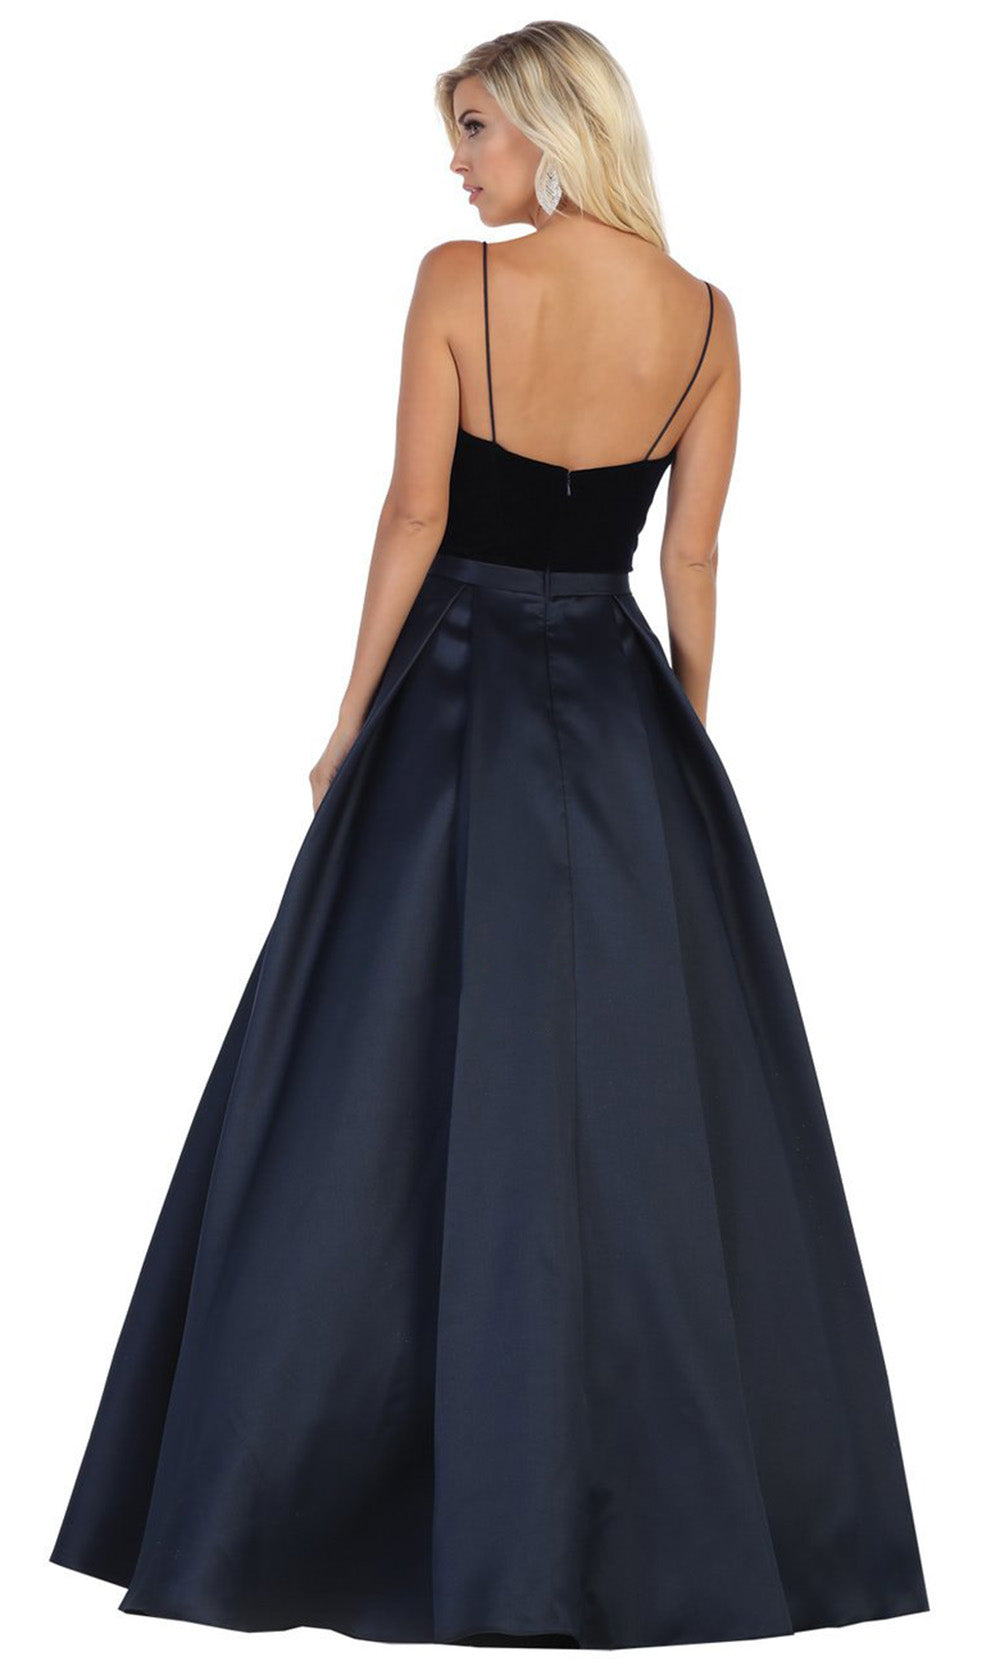 May Queen - RQ7742 Crisscross Front A-Line Gown In Blue and Black